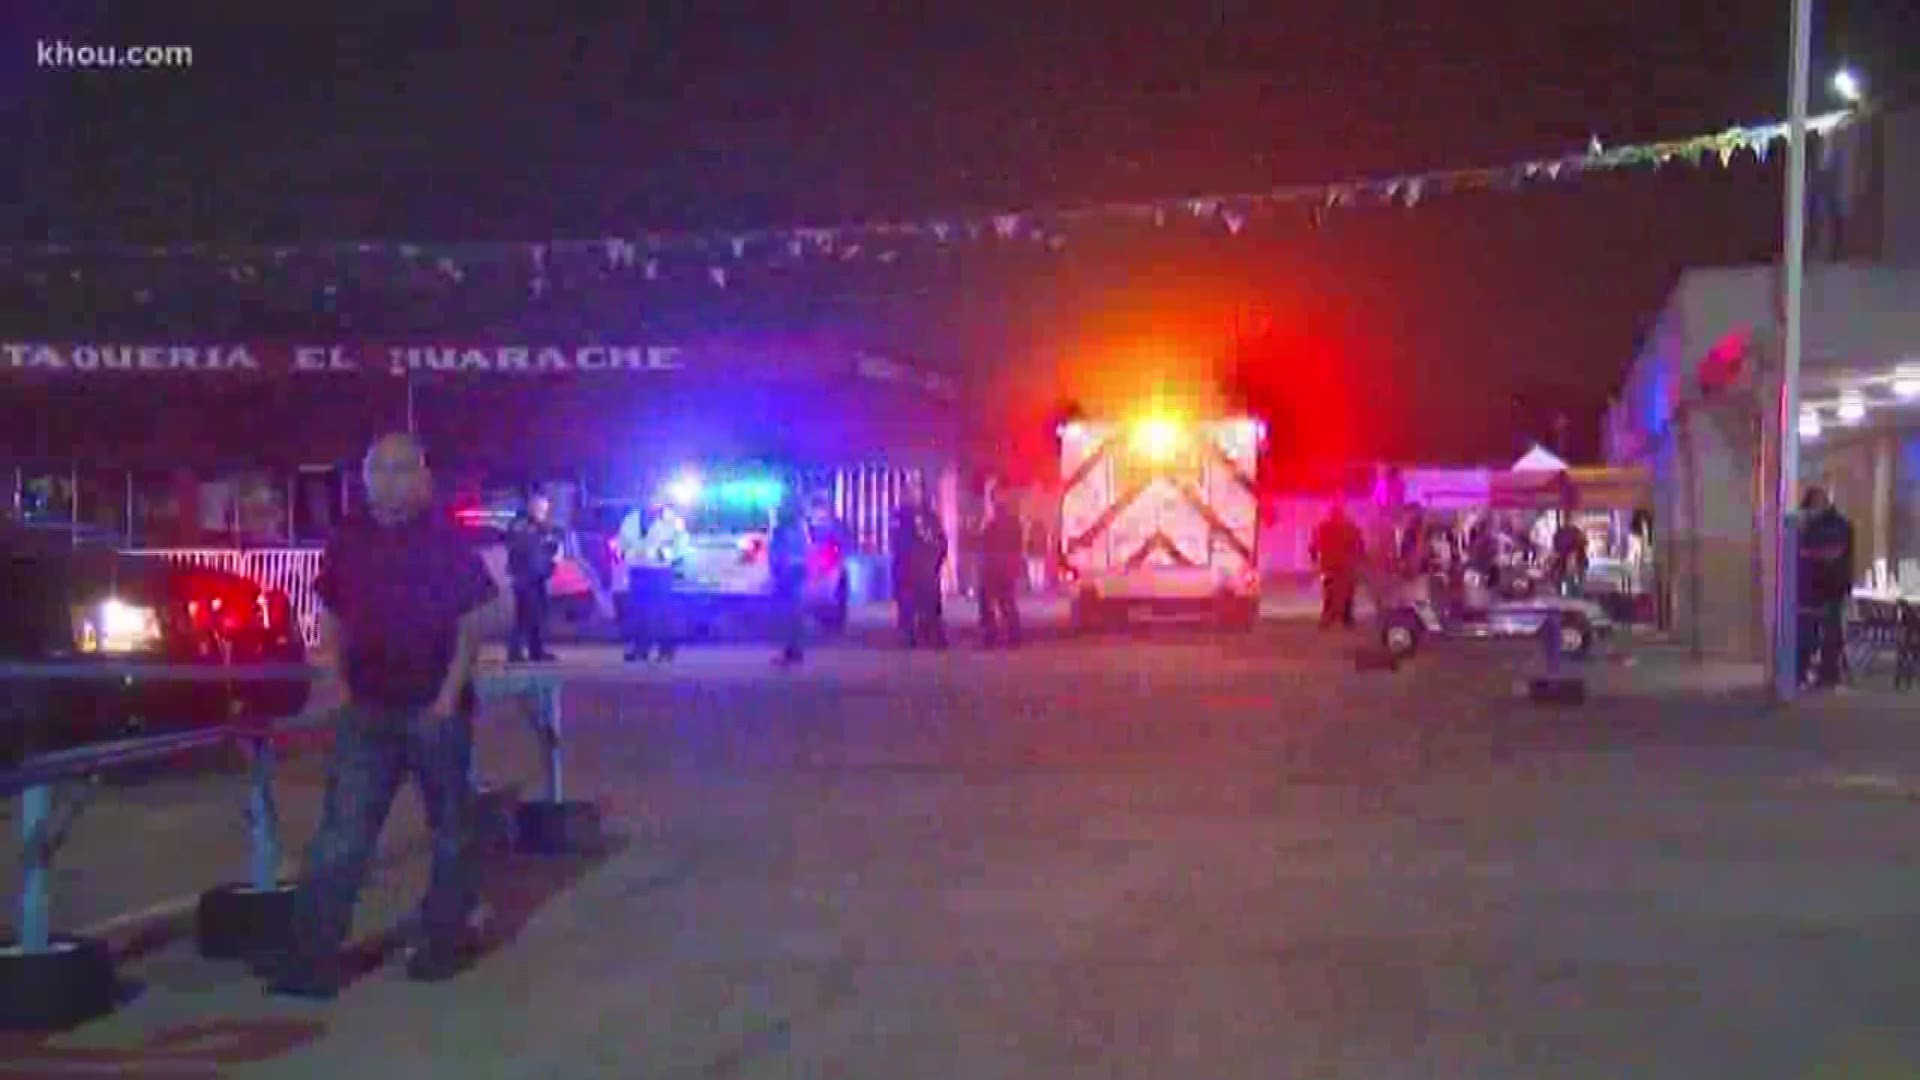 Seven people were injured in a shooting at a flea market in north Harris County. The gun owner said it was an accident.